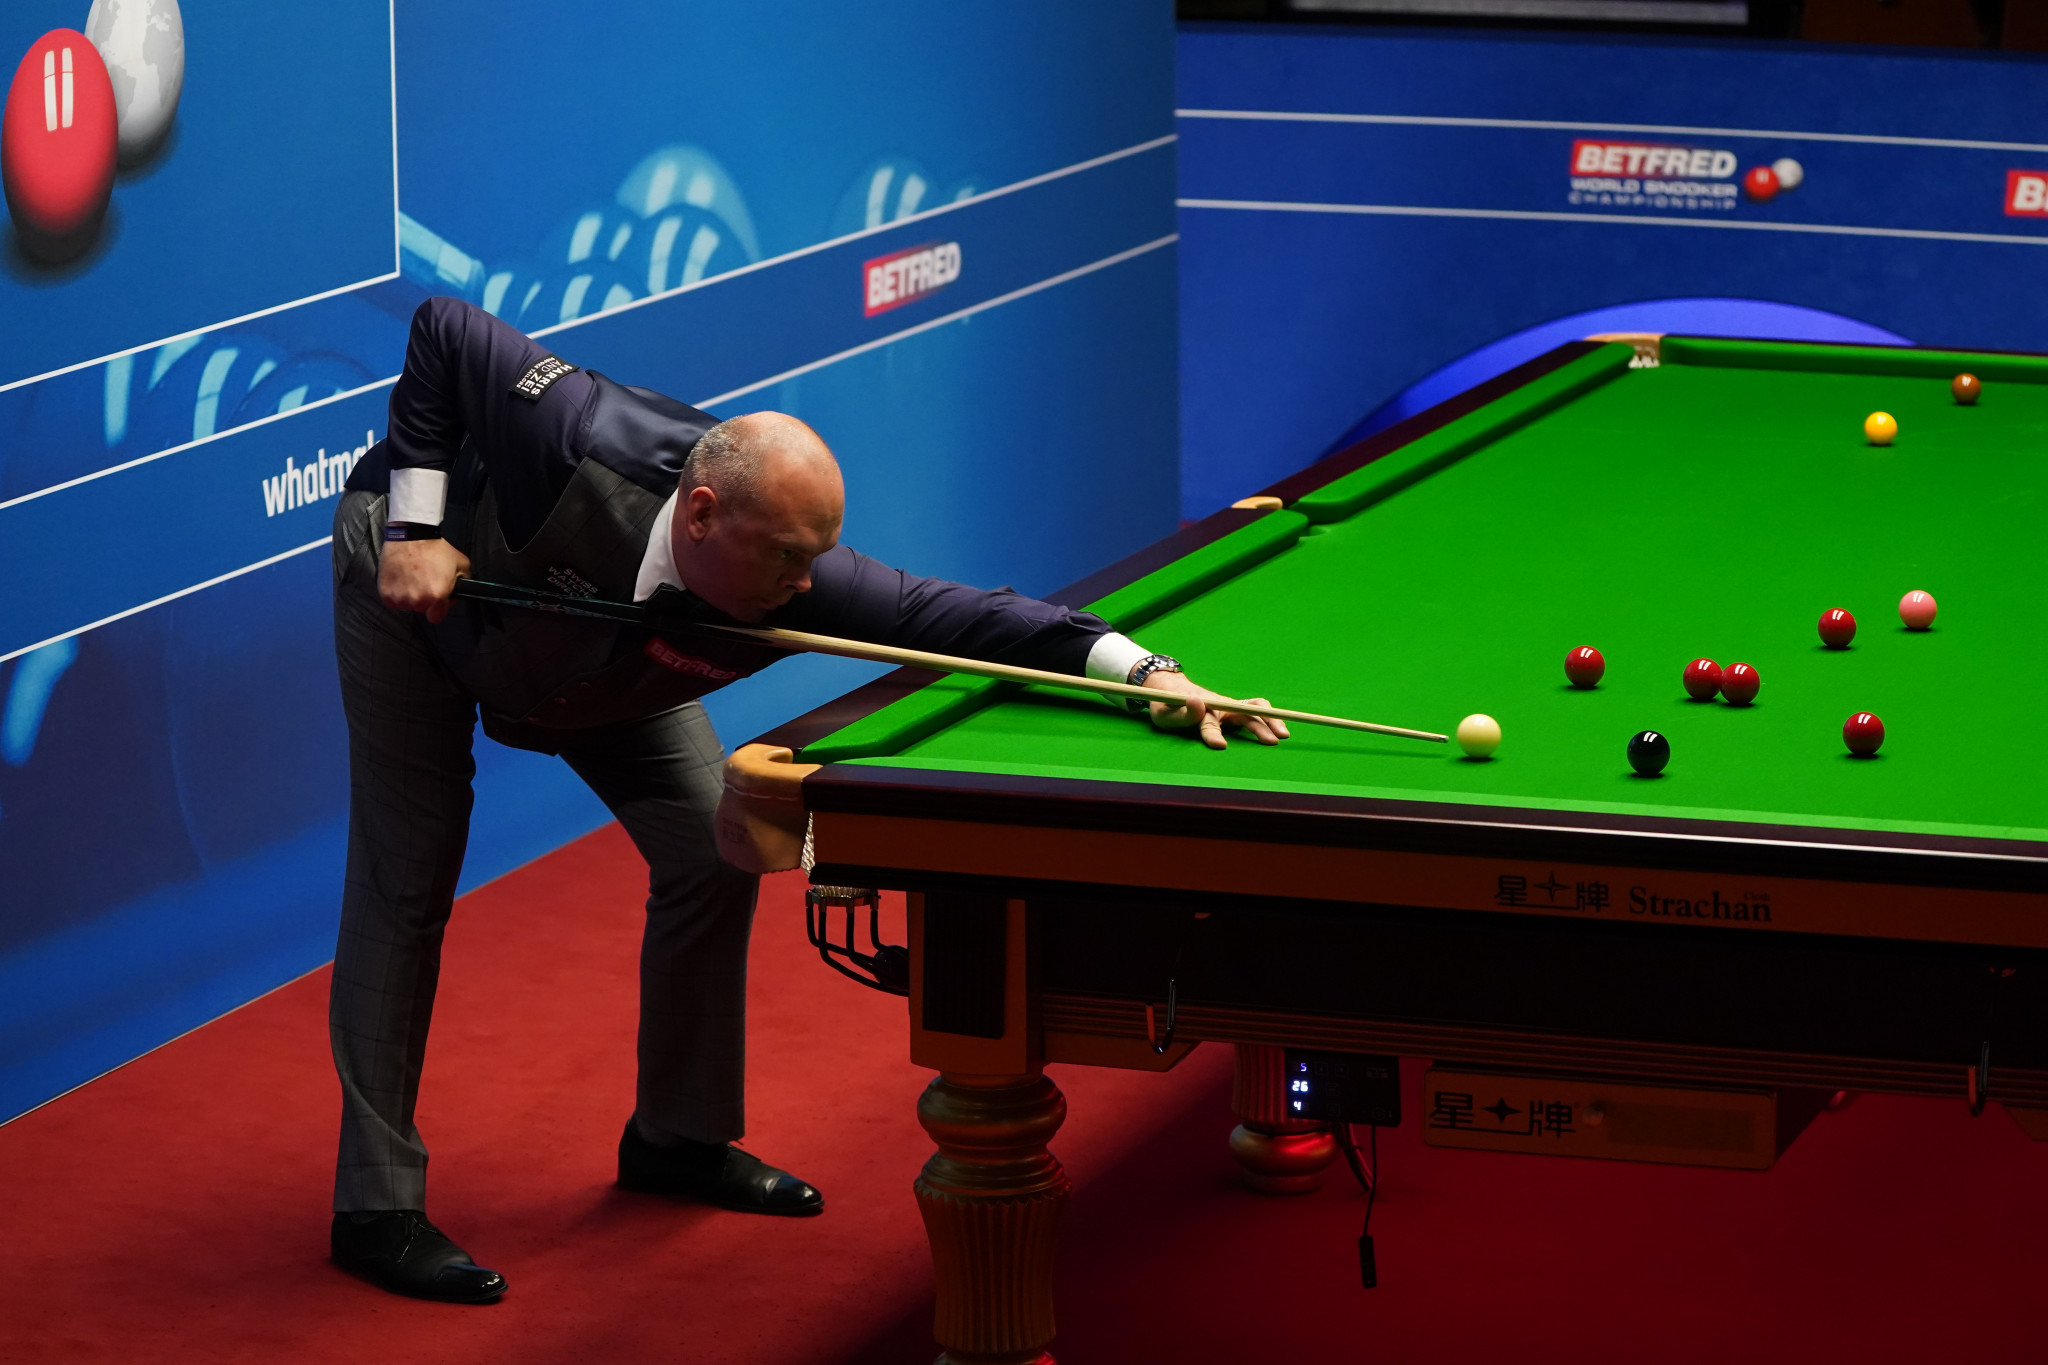 2015 world champion Stuart Bingham triumphed in a decider against Scotland's Anthony McGill to reach the last four in Sheffield ©Getty Images